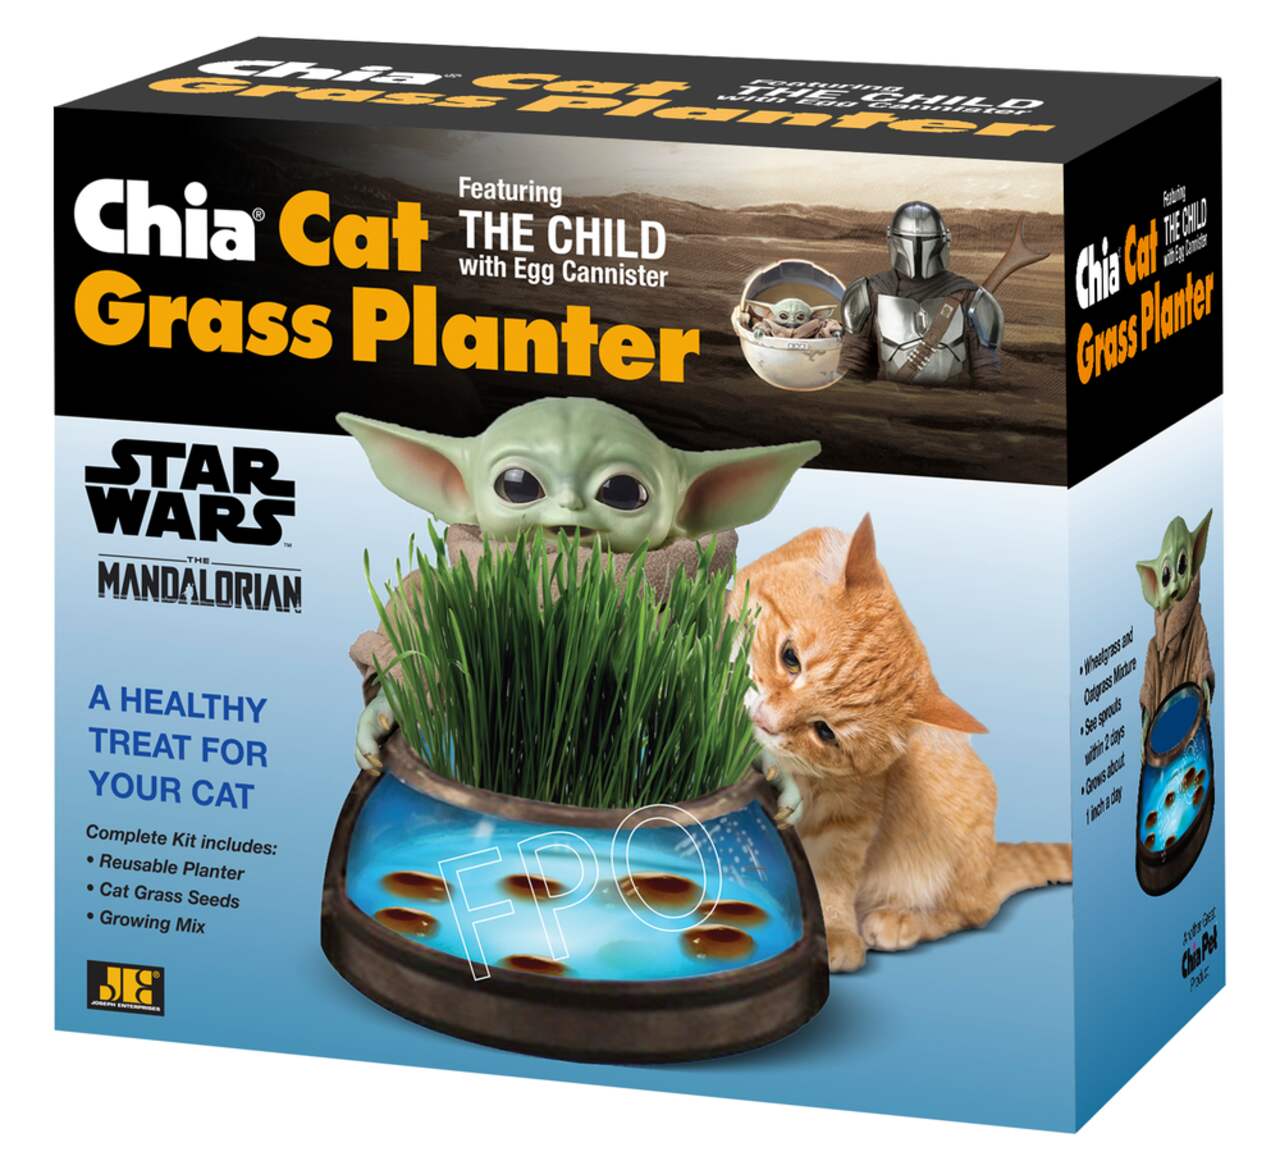 The Mandalorian The Child with Egg Cannister Chia Cat Grass Planter